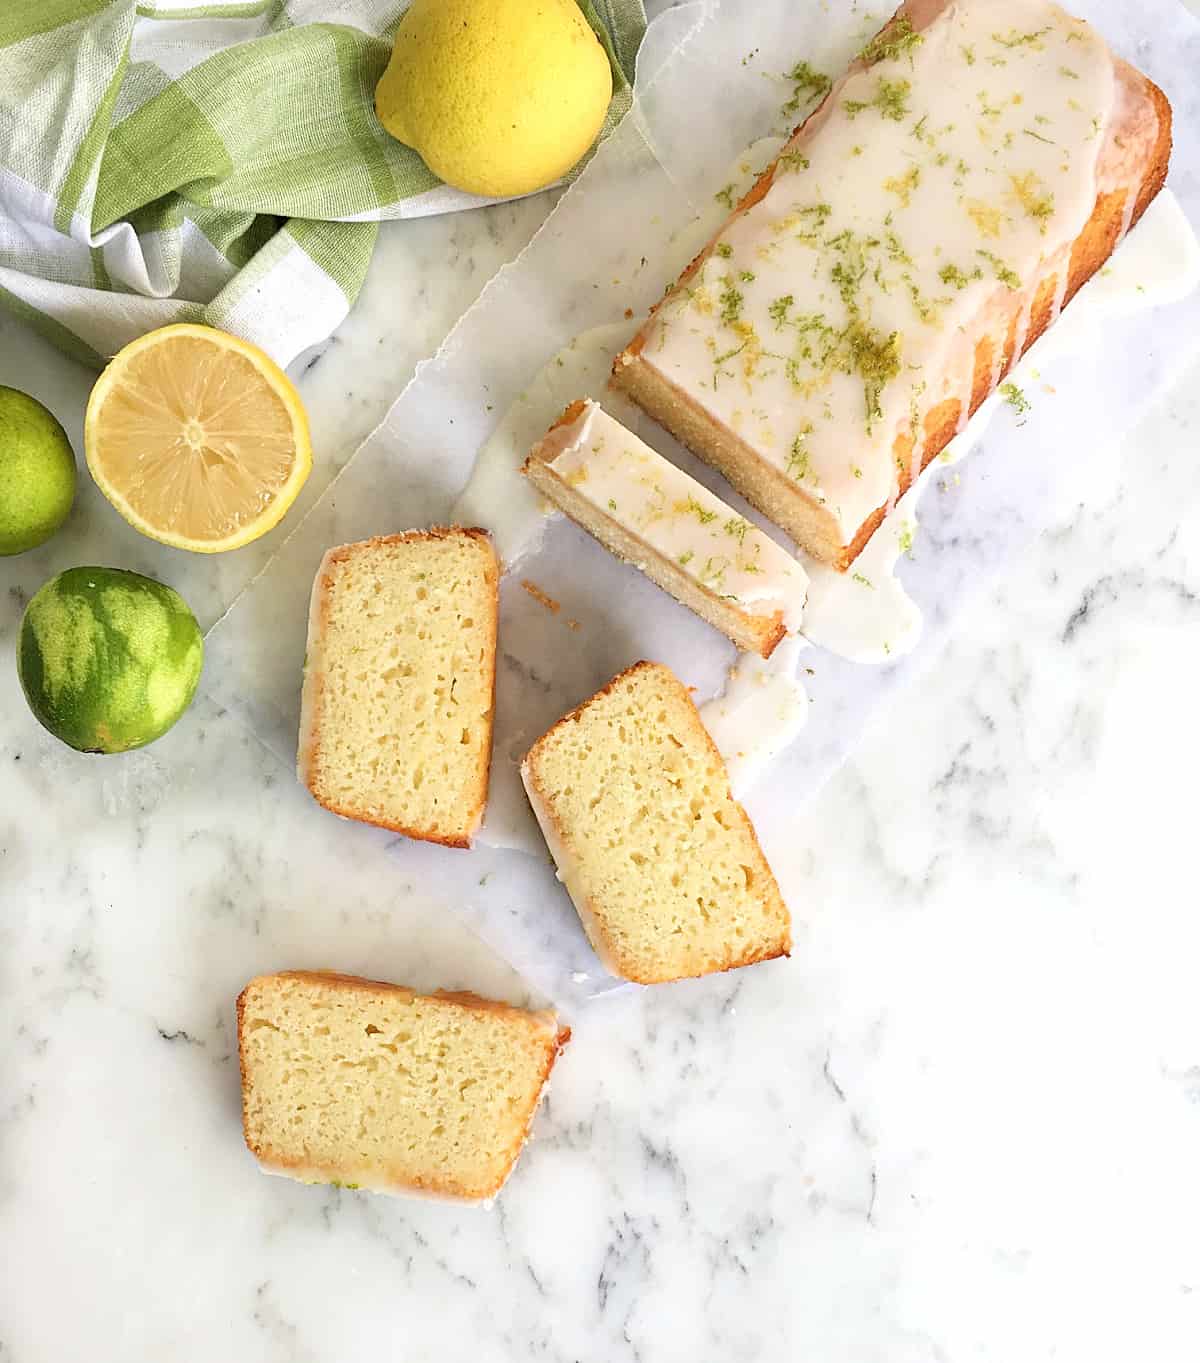 View from above of whole and sliced glazed loaf cake, white marble surface, lemons and limes nearby